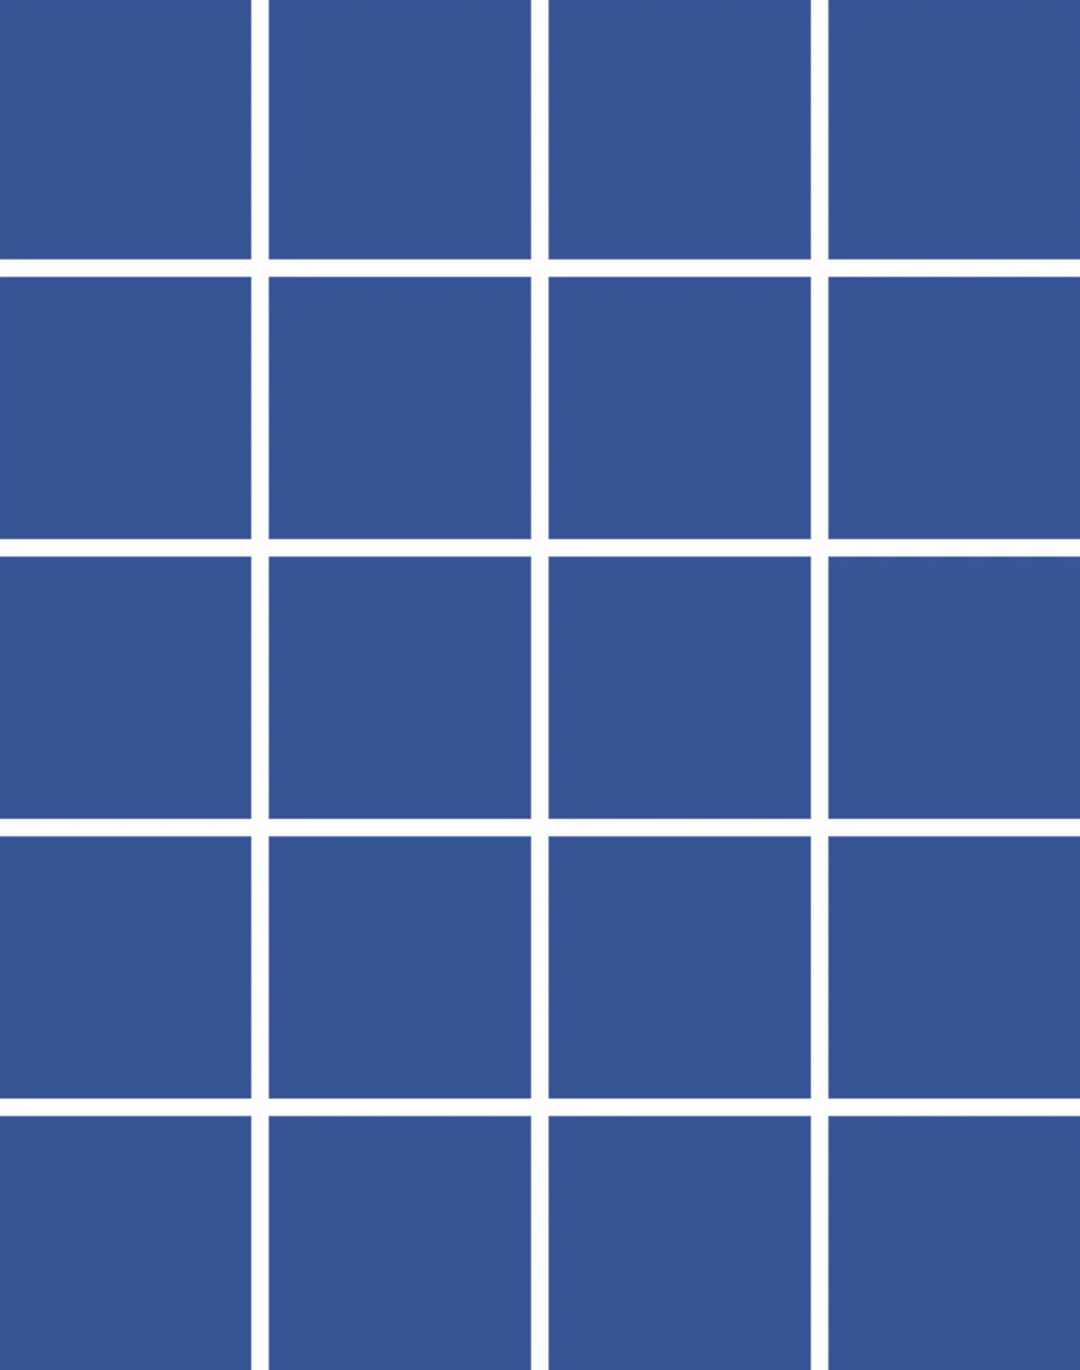 Grid - Small Thin, Line: White | Background: Blue